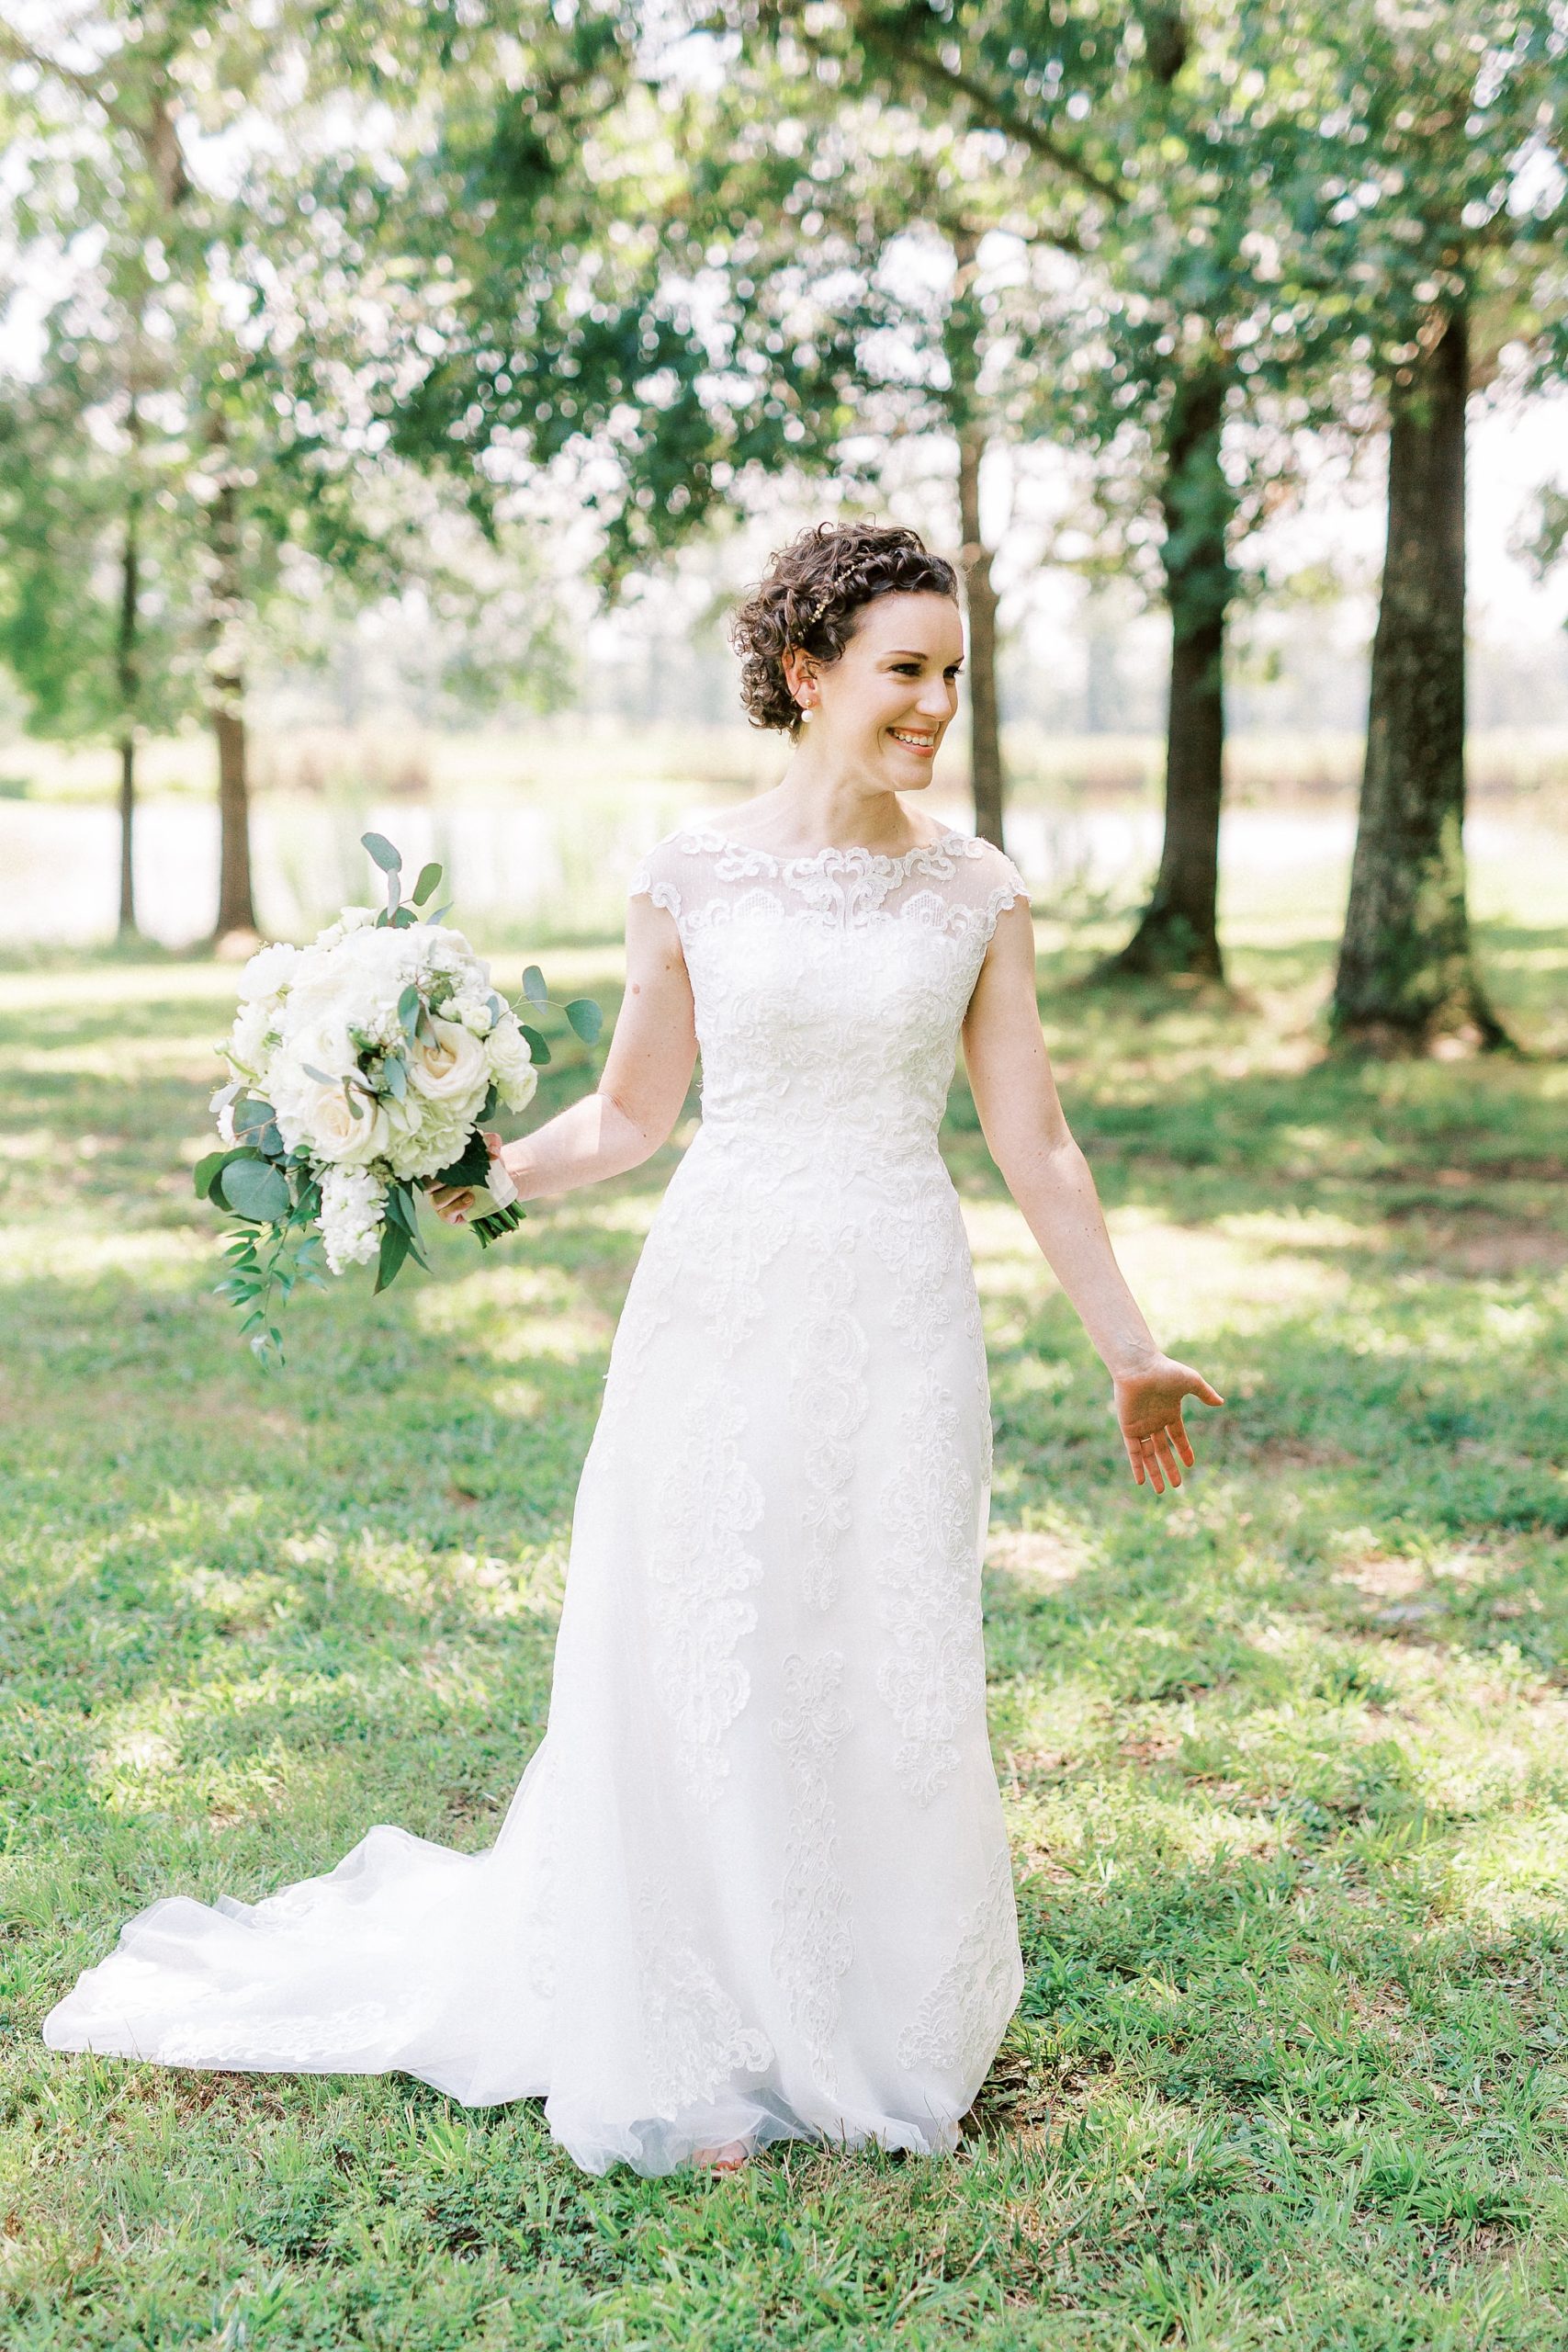 Elegant wedding in Charlotte NC photographed by Kevyn Dixon Photography with light blue and navy details